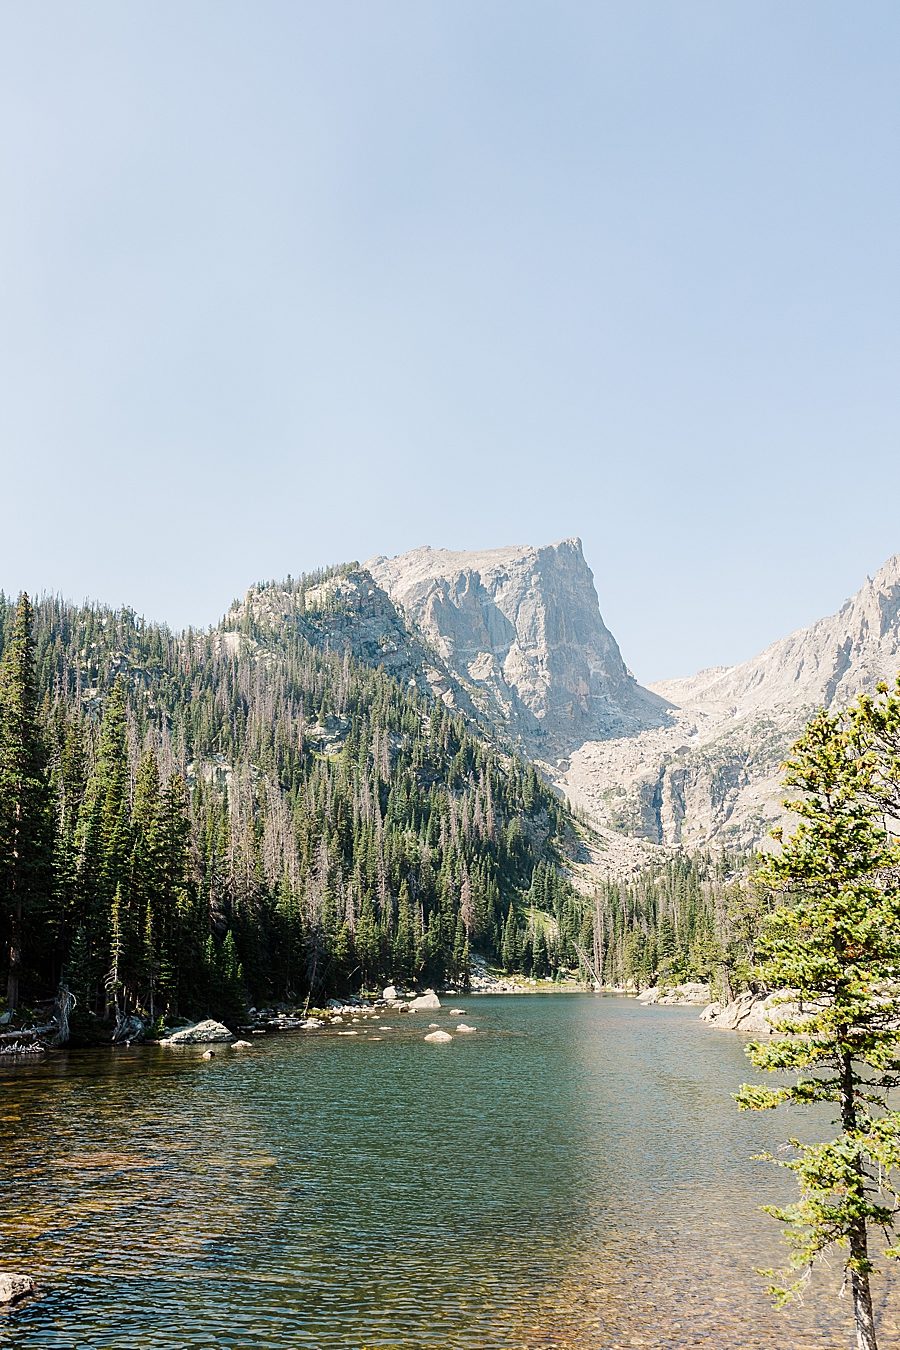 Great view of Dream Lake in the Rocky Mountain National Park by Knoxville Wedding Photographer, Amanda May Photos.